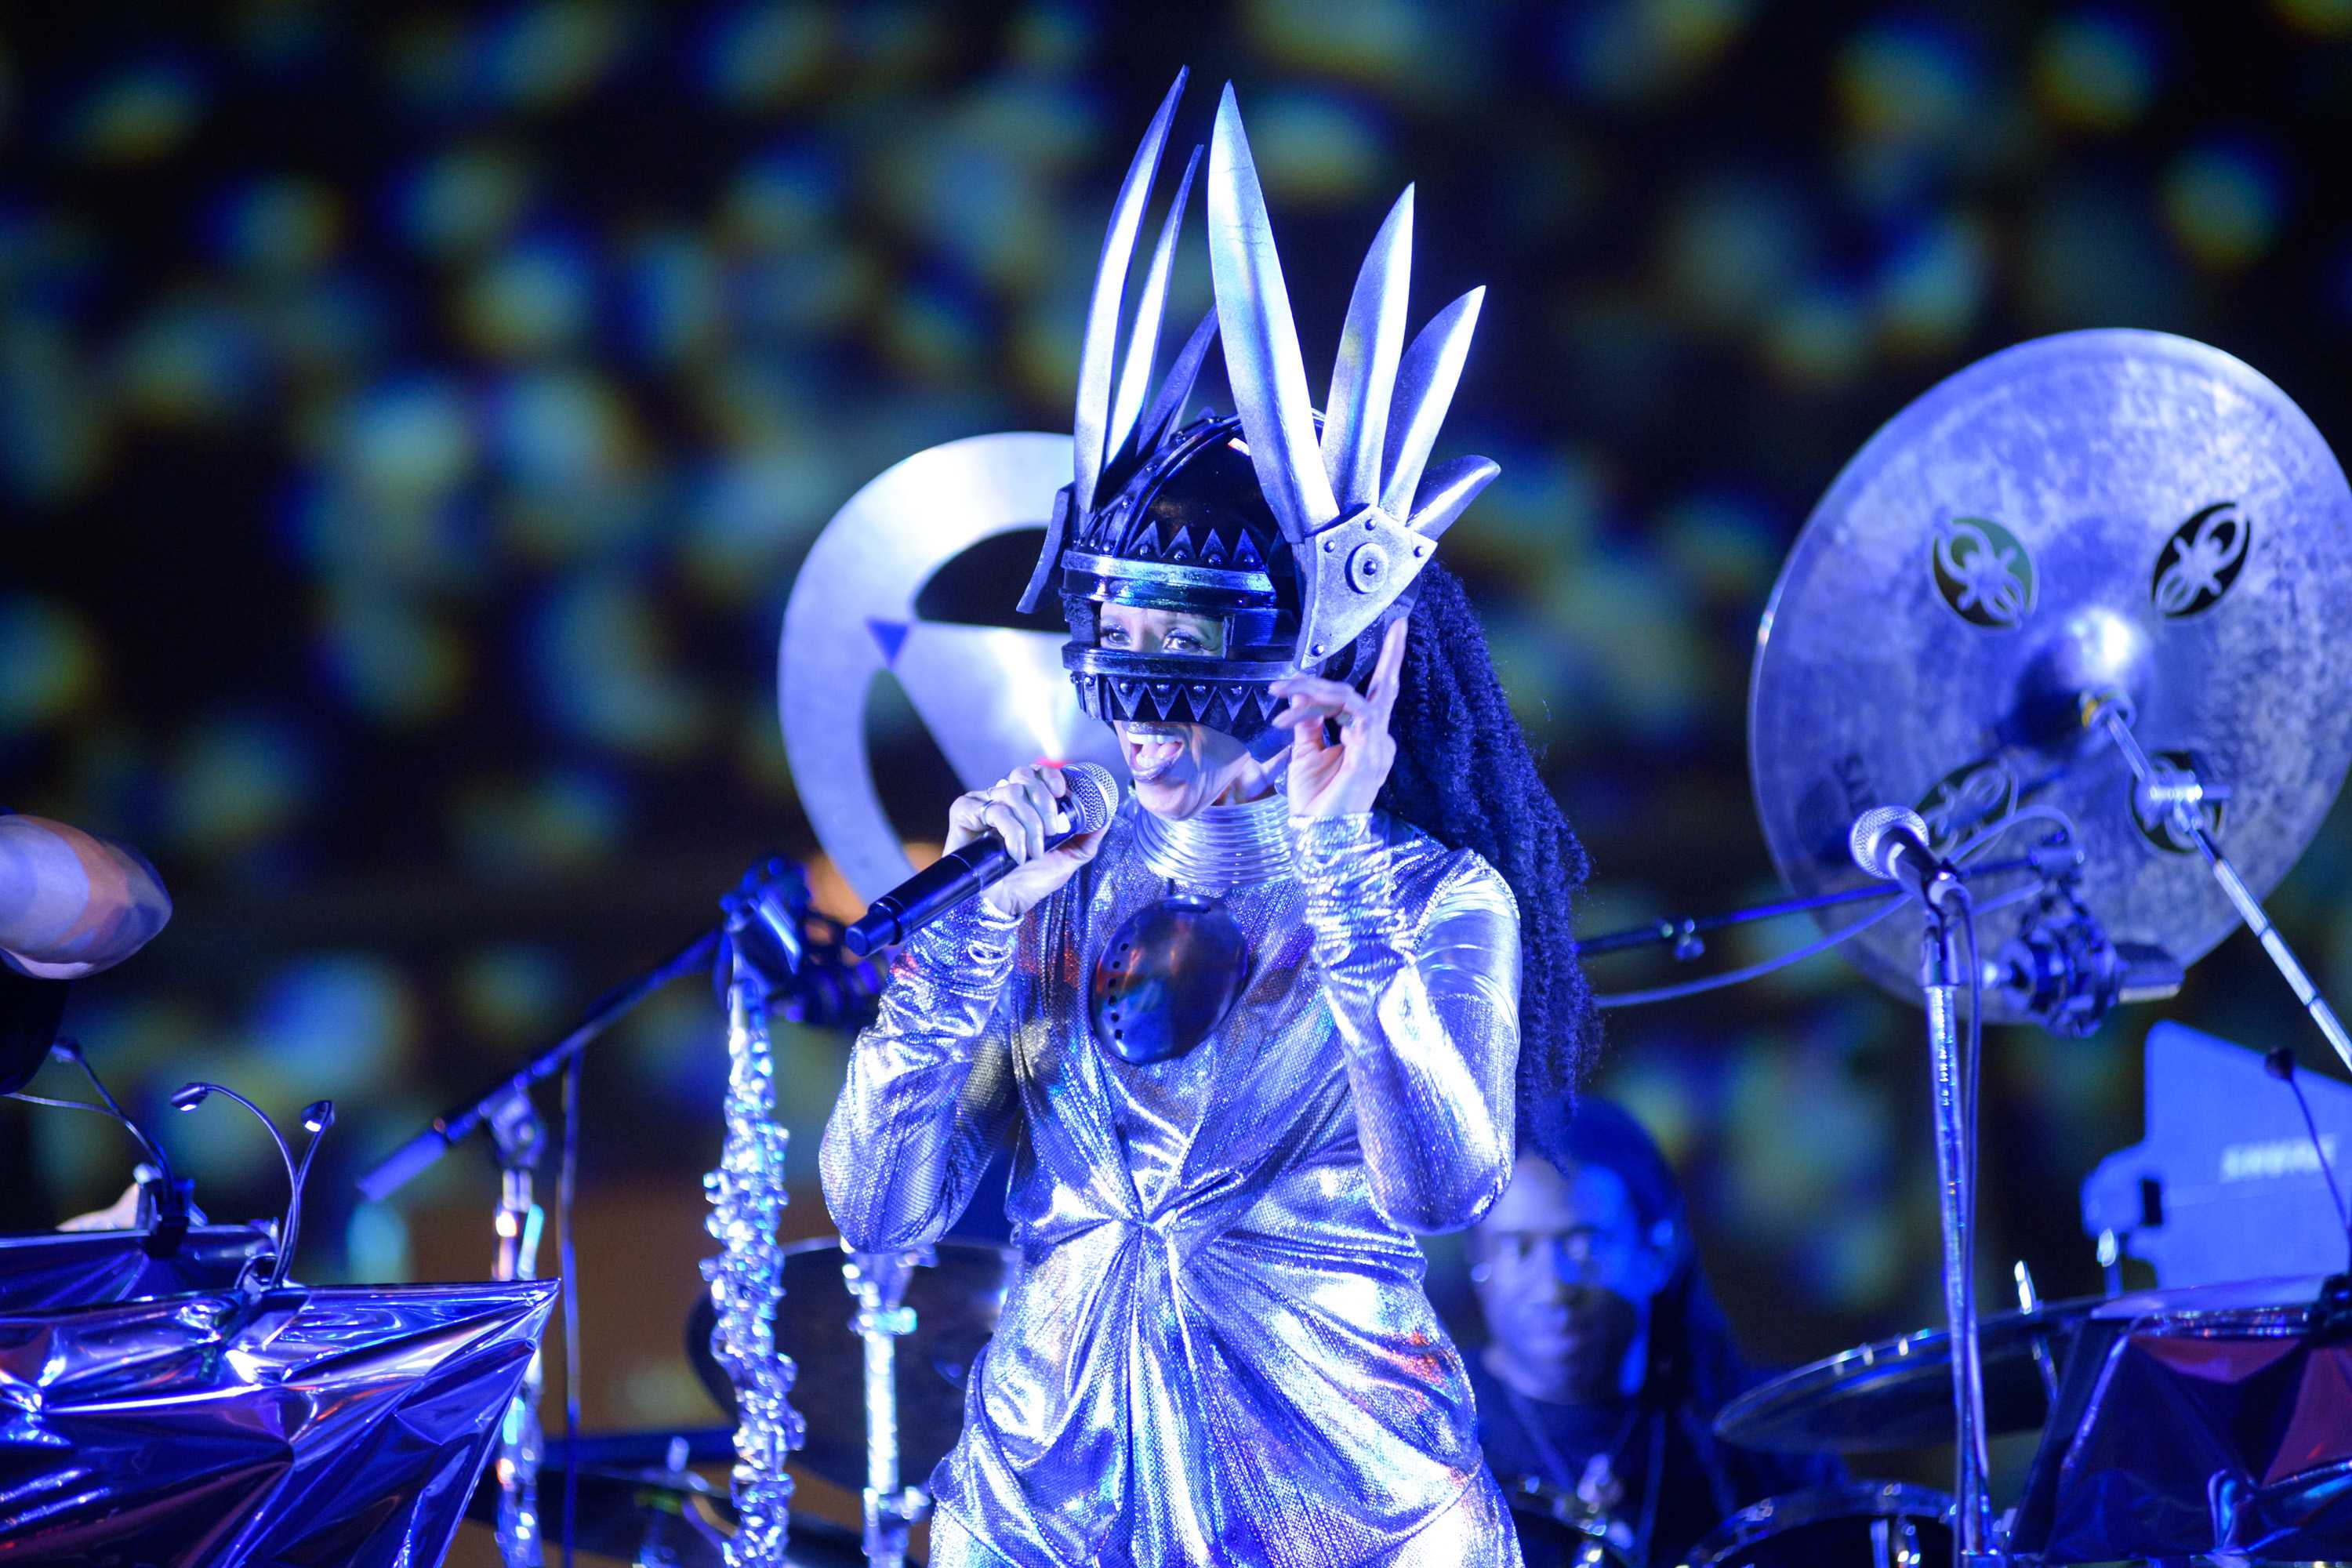 Hendryx preforming in a futurist sliver costume, which includes a sculpturally pointed helmet.